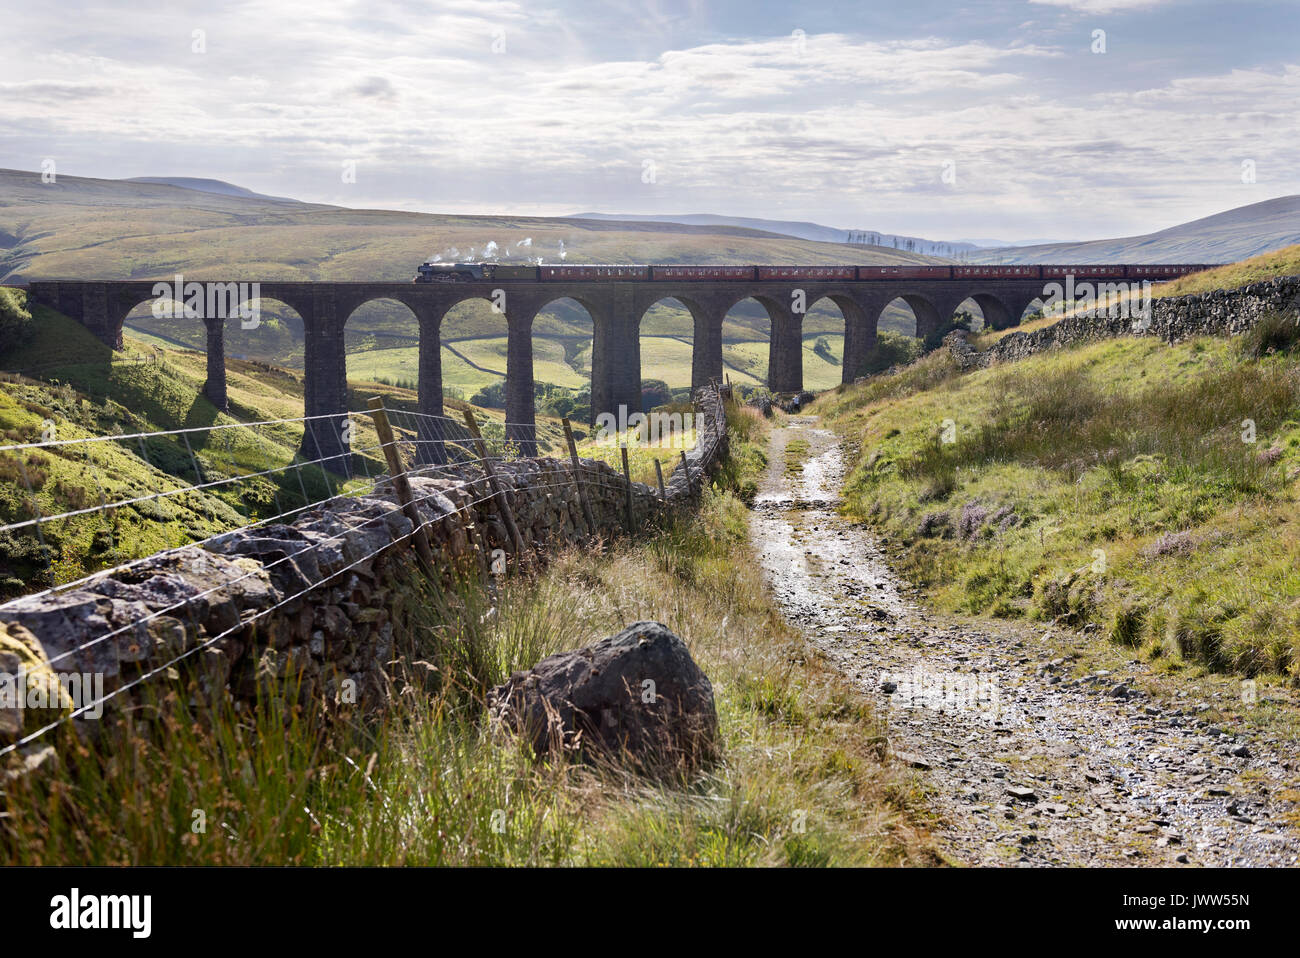 The Flying Scotman steam locomotive hauls 'The Waverley' special train over Arten Gill viaduct on the Settle-Carlisle railway line in the Yorkshire Dales National Park, travelling from Carlisle back to York. Credit: John Bentley/Alamy Live News Stock Photo